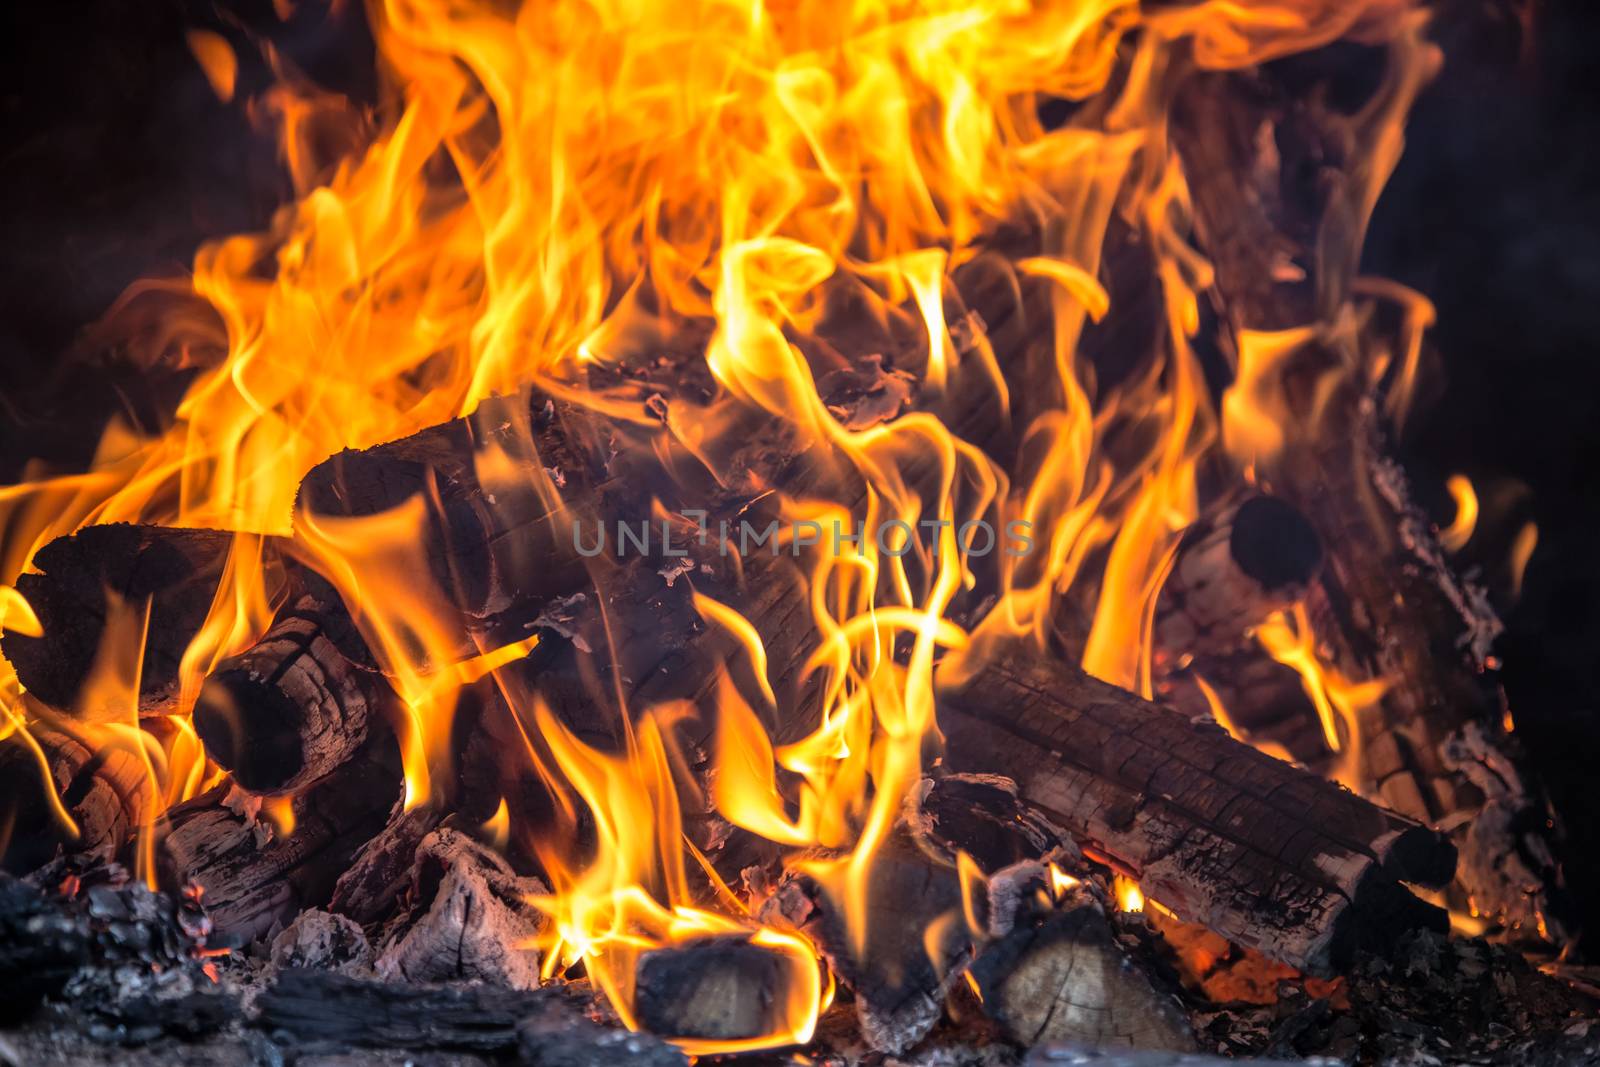 Flames of bonfire in fireplace